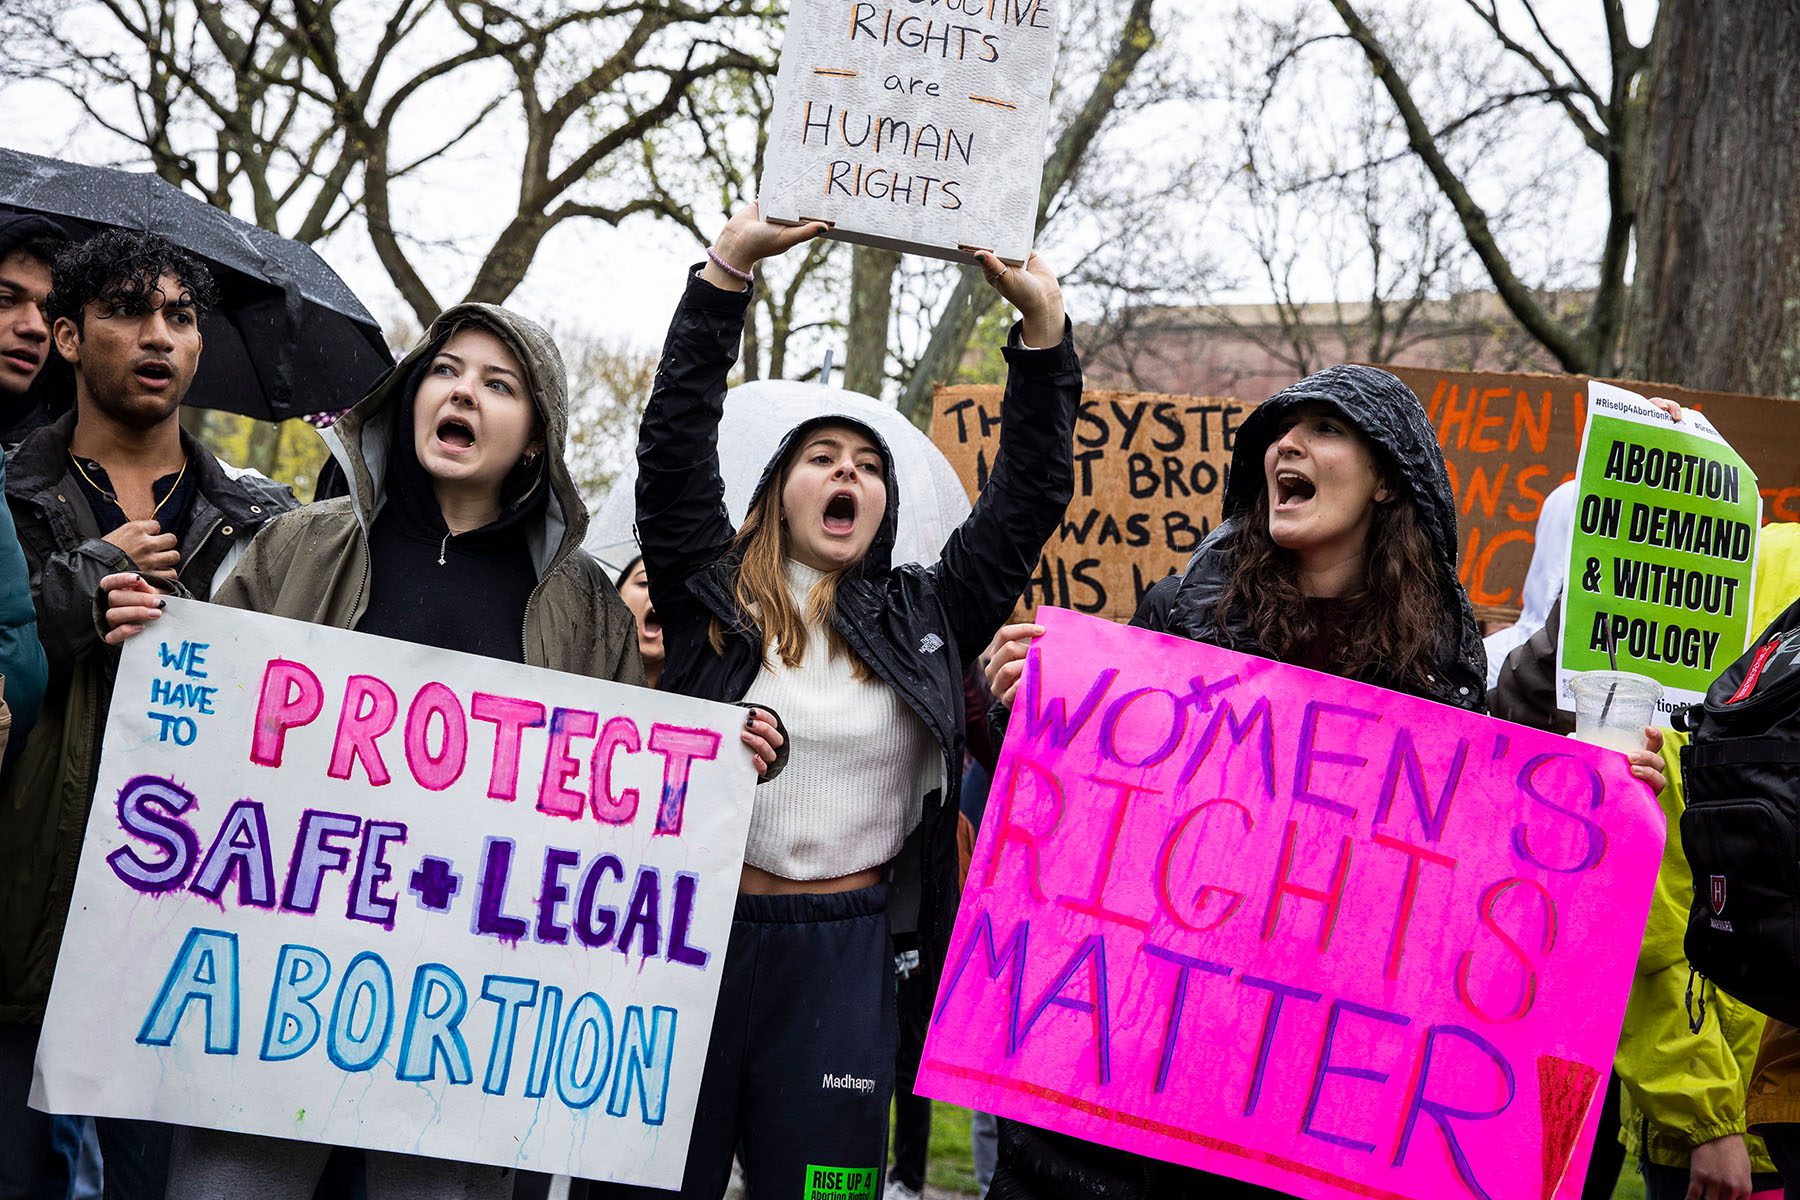 Harvard University freshmen carry signs that read "we have to protect safe + legal abortion," "women's rights matter!" and "reproductive rights are human rights" on the Harvard campus.